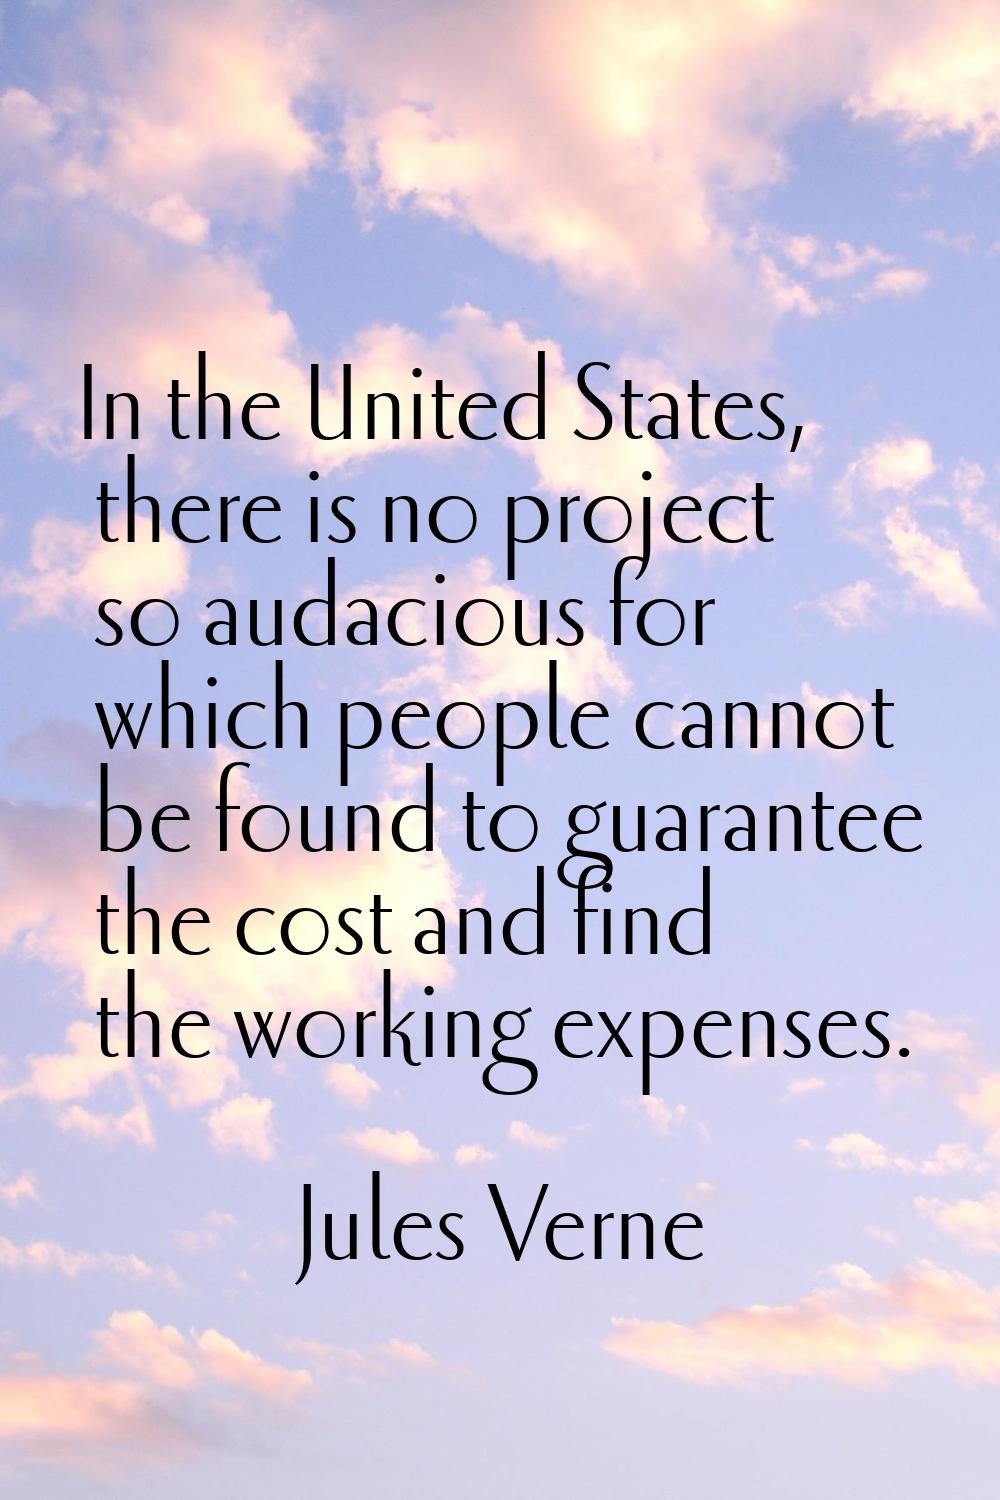 In the United States, there is no project so audacious for which people cannot be found to guarante